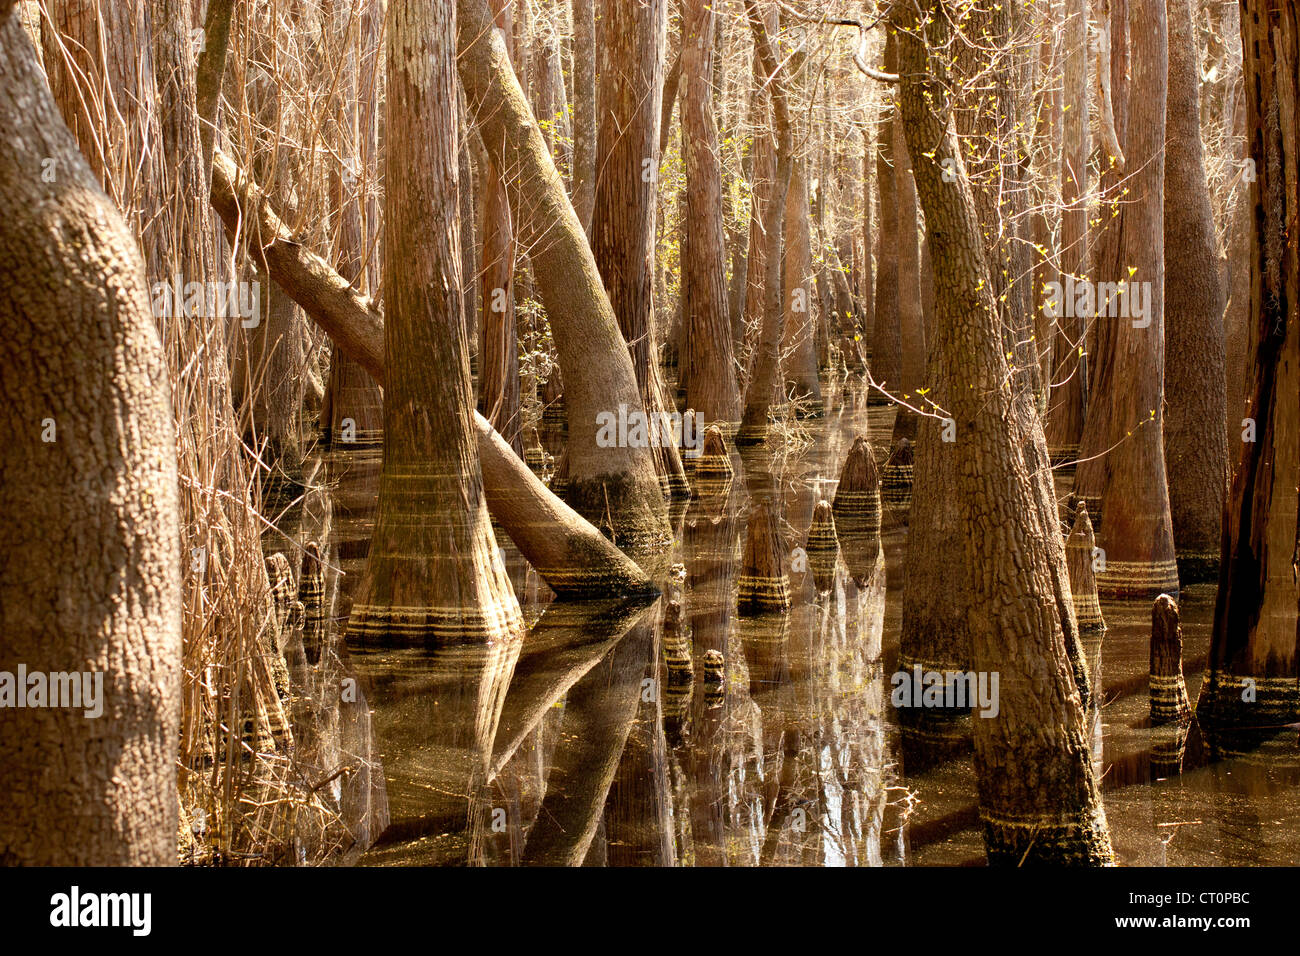 Pollen rings in a flooded cypress swamp Stock Photo